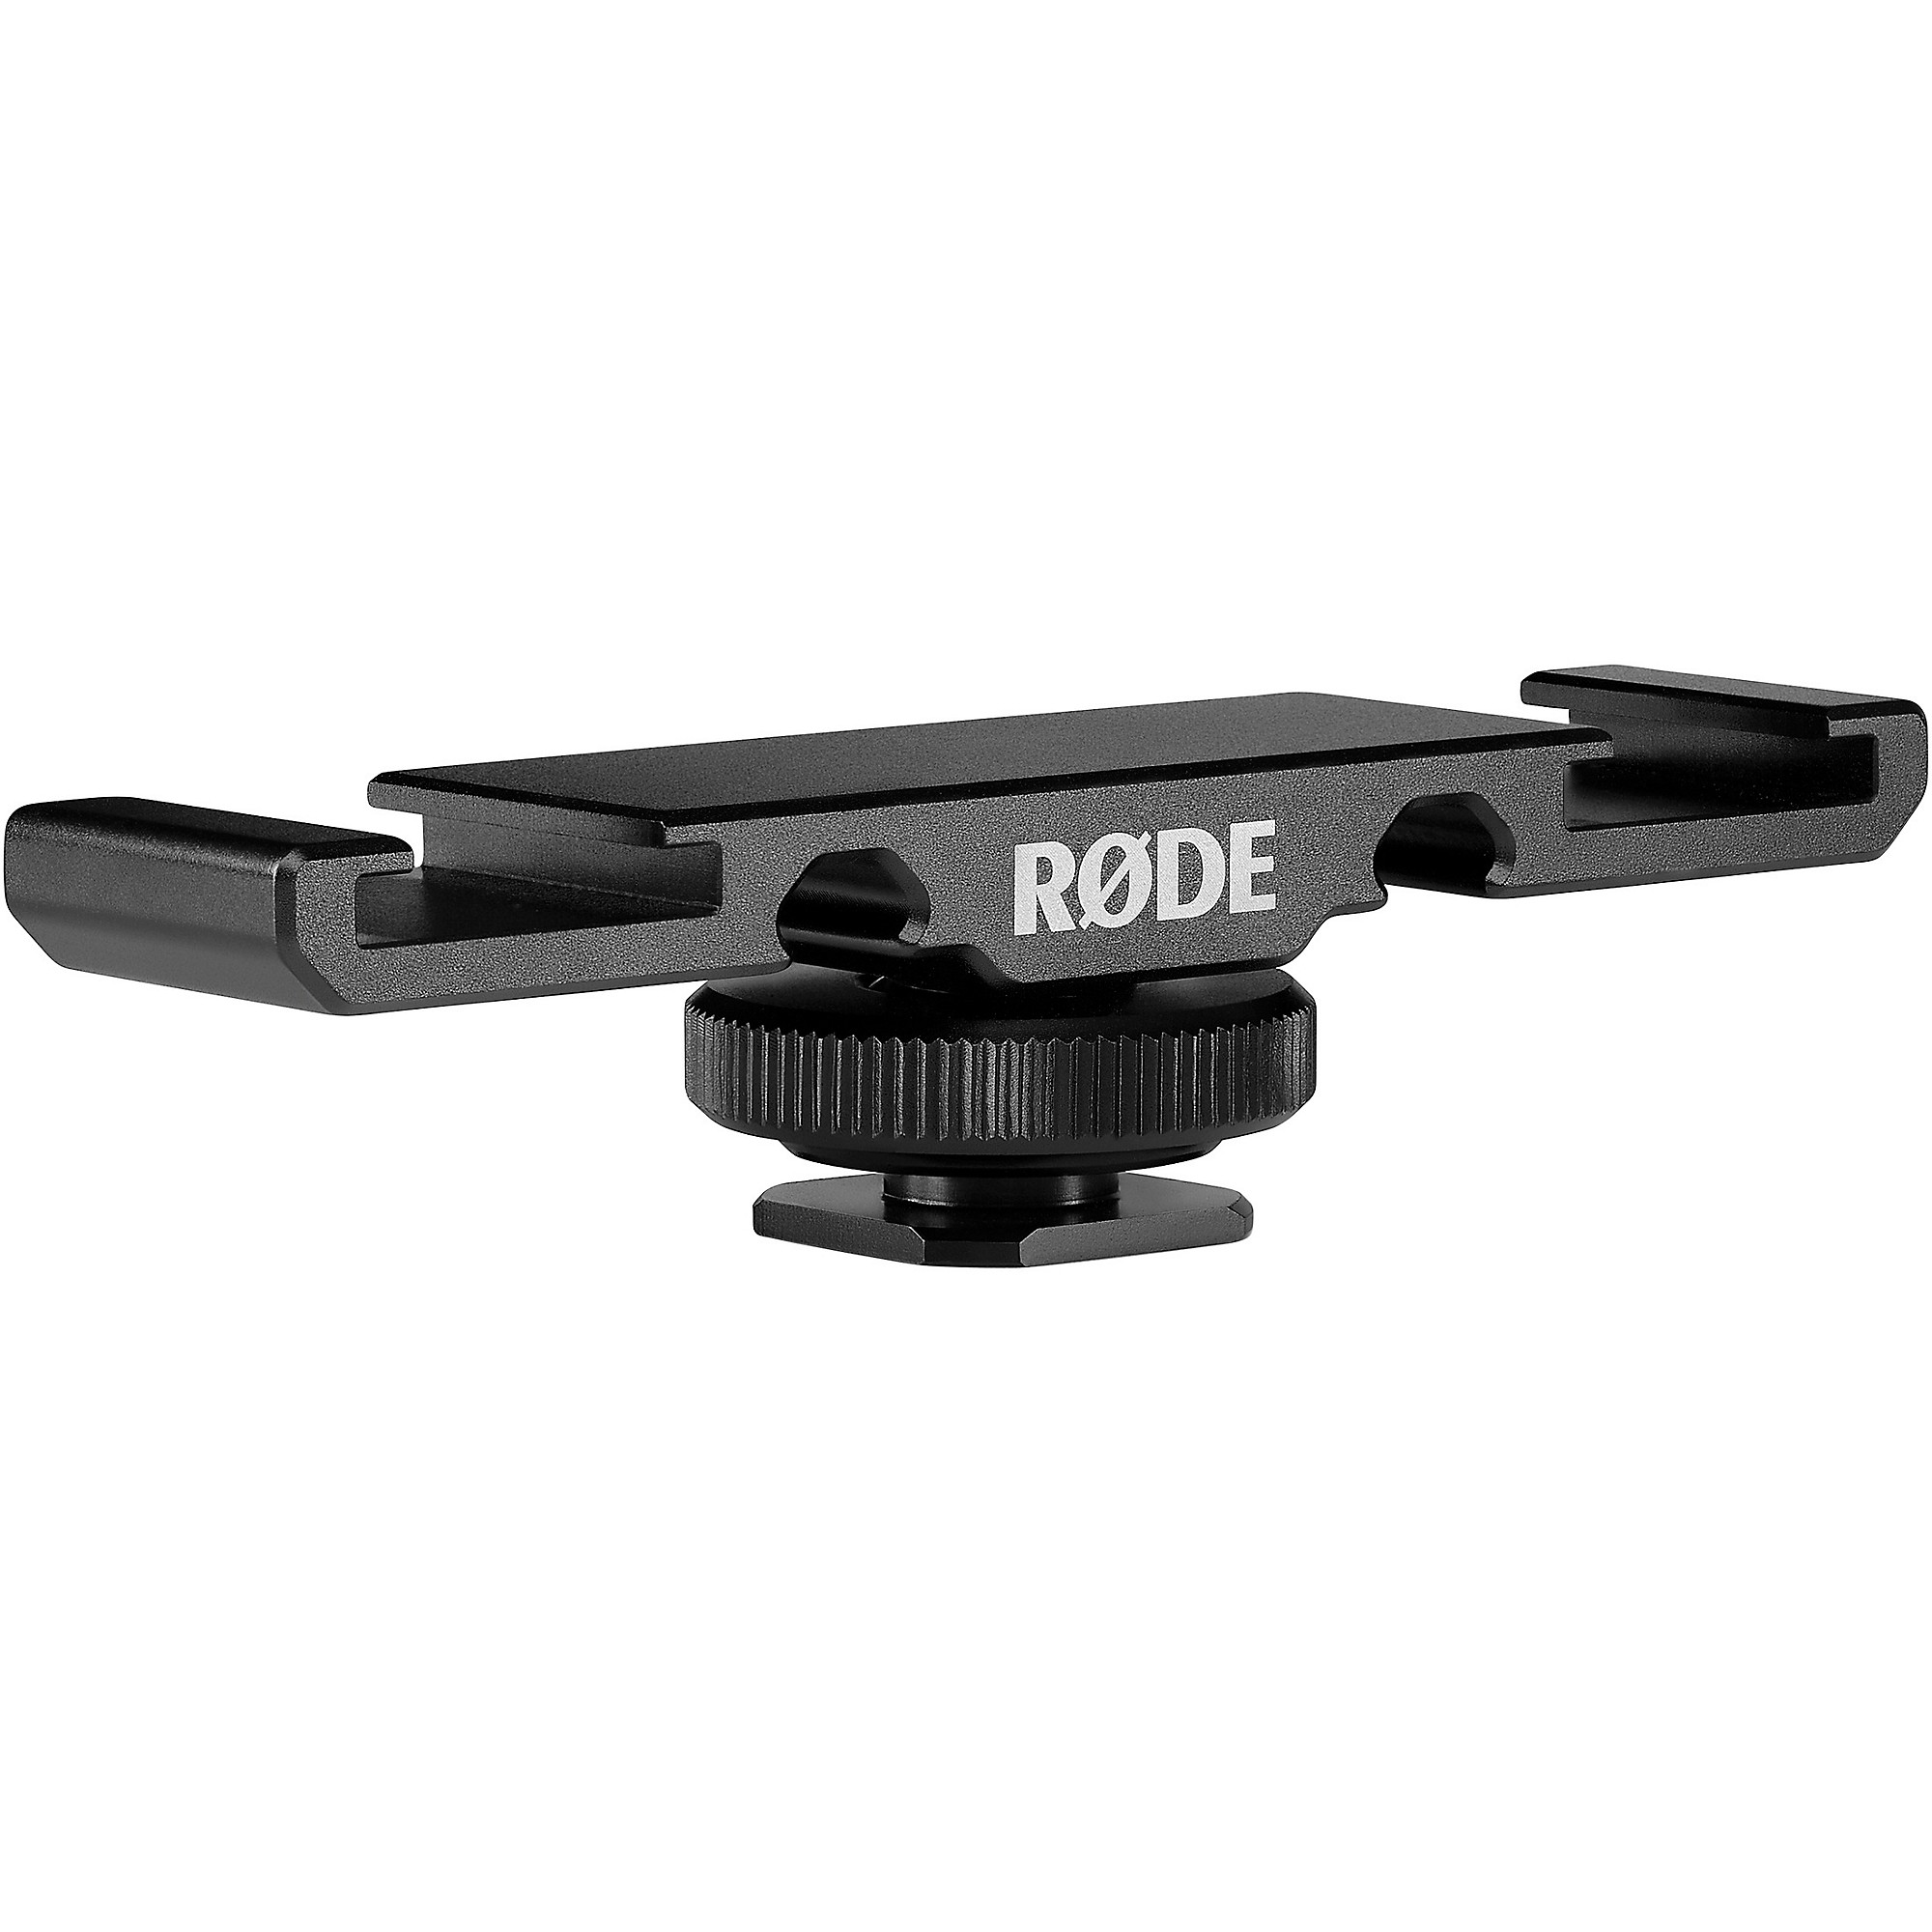 RODE Vlogger Kit for Mobile Phones With 3.5 mm Compatibility 